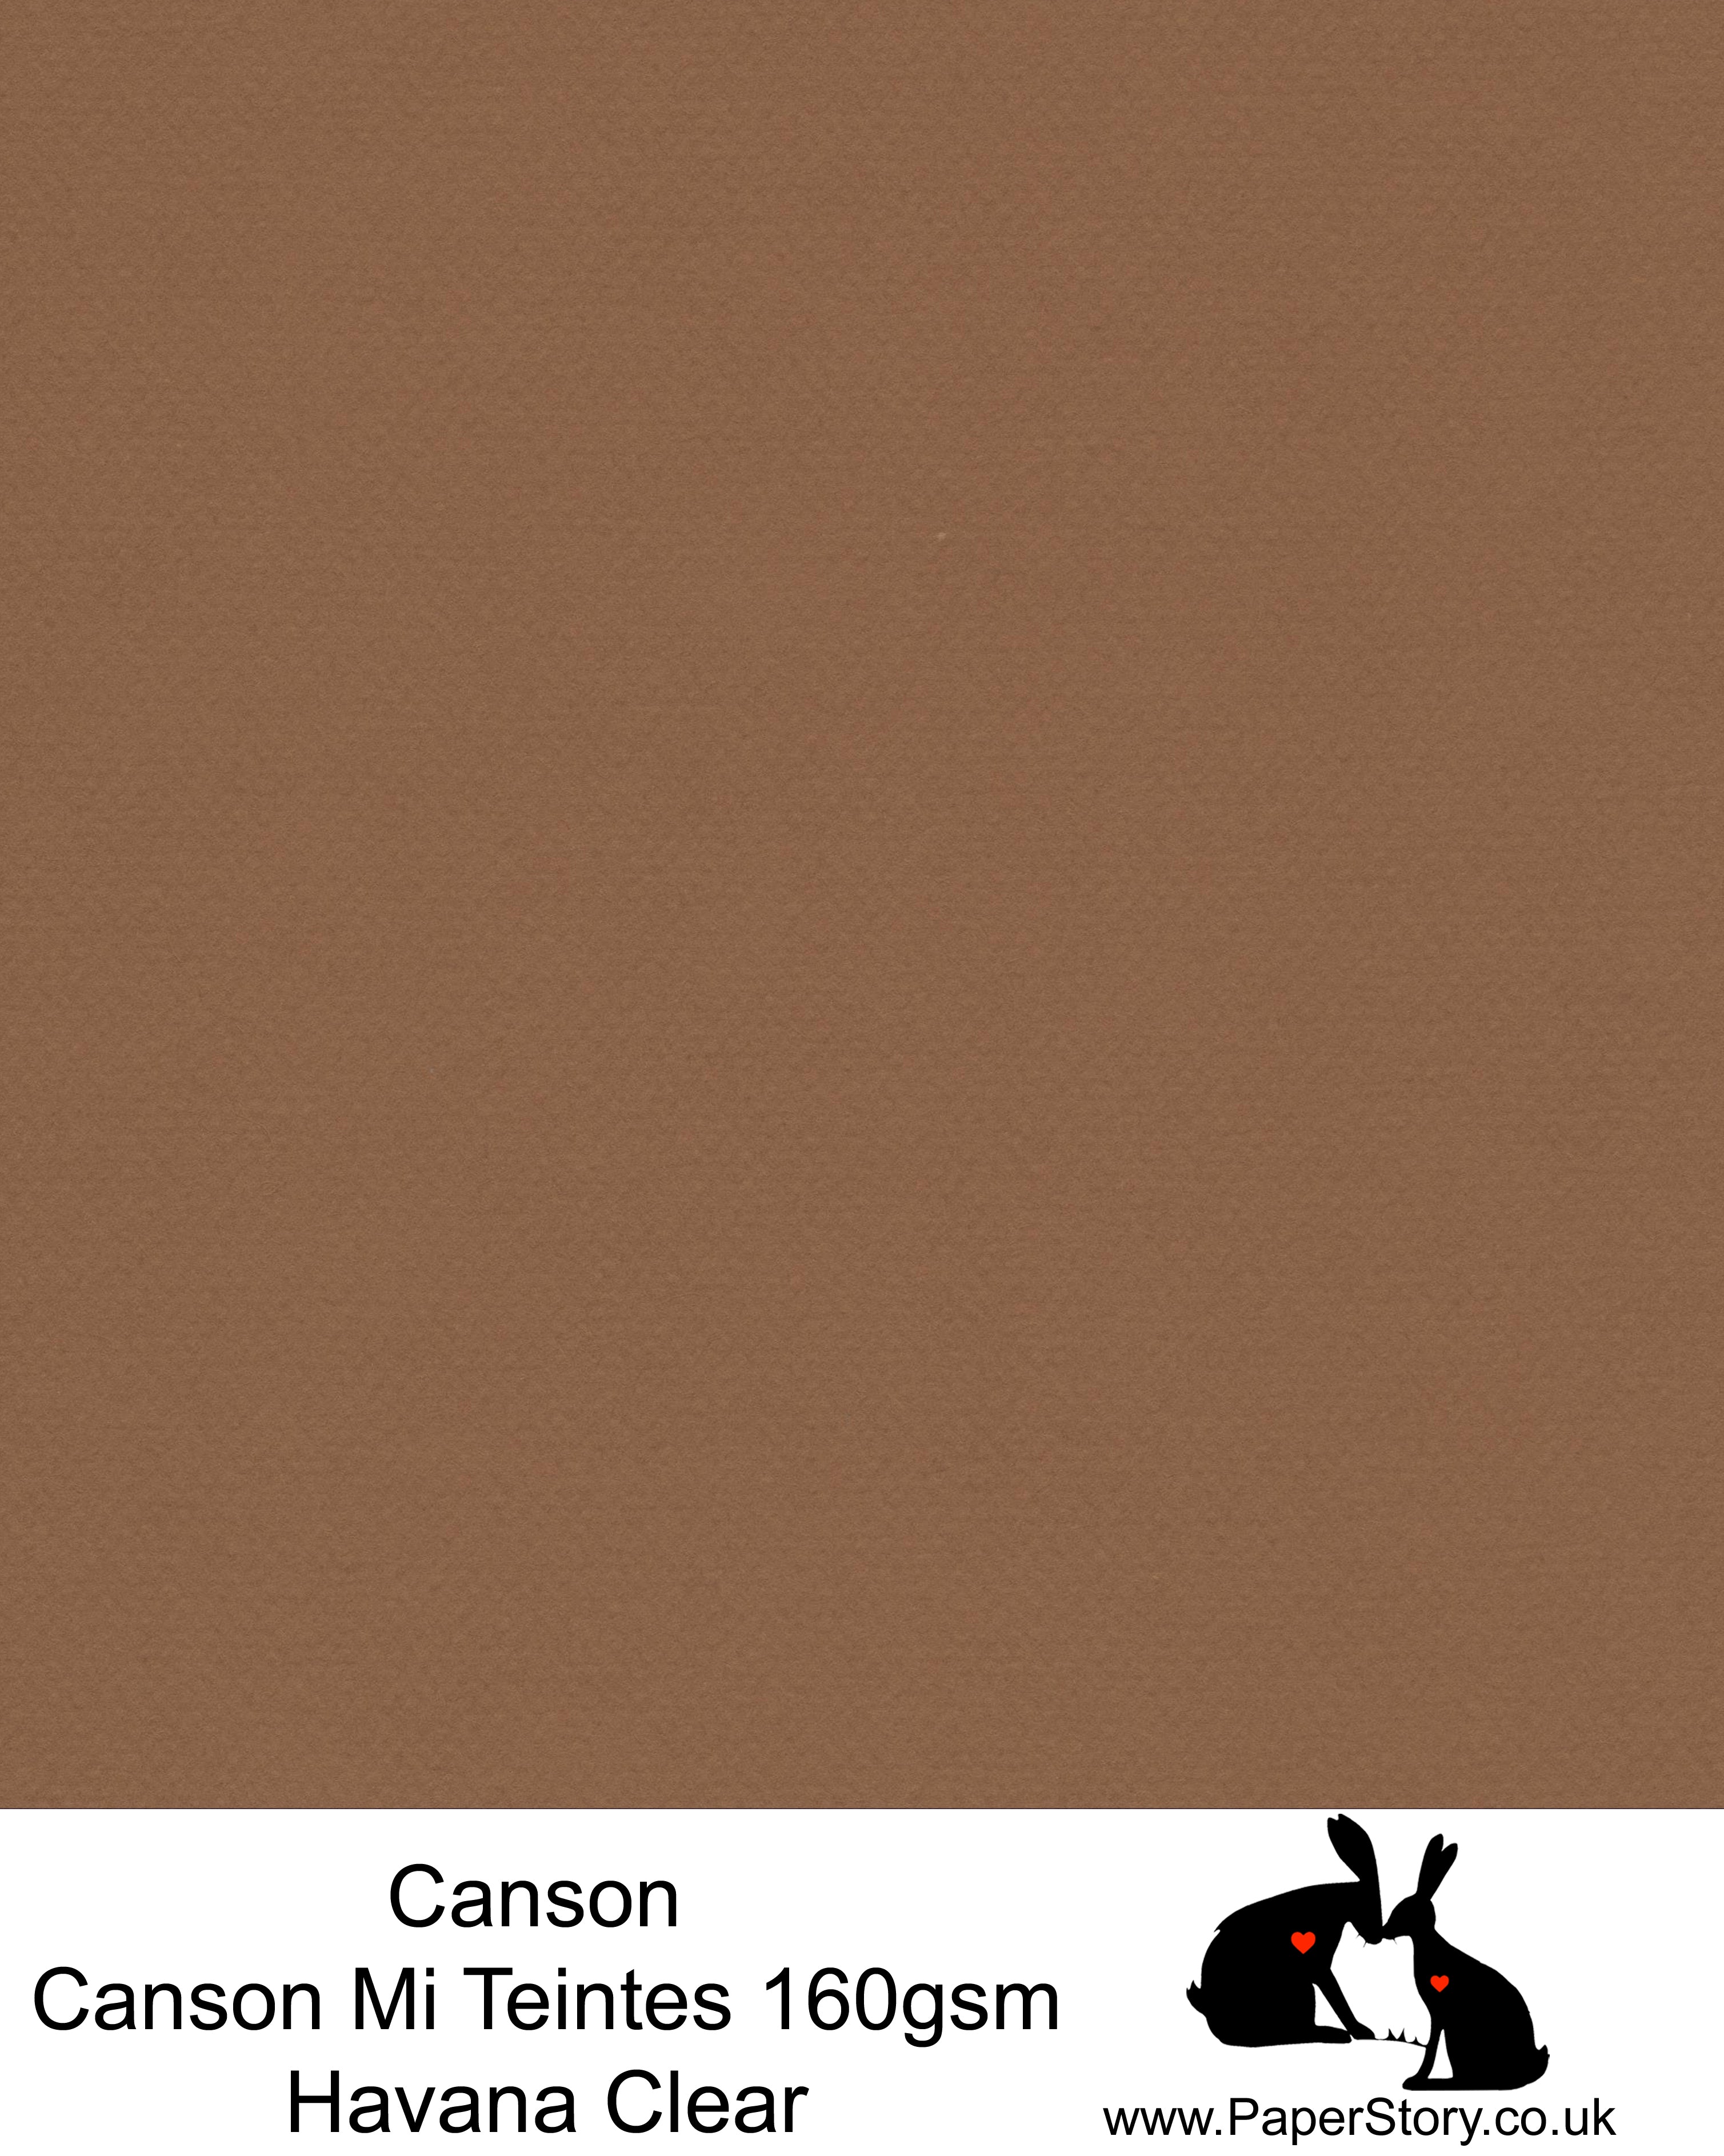 Canson Mi Teintes acid free, Havana Clear, warm red brown  hammered texture honeycomb surface paper 160 gsm. This is a popular and classic paper for all artists especially well respected for Pastel  and Papercutting made famous by Paper Panda. This paper has a honeycombed finish one side and fine grain the other. An authentic art paper, acid free with a  very high 50% cotton content. Canson Mi-Teintes complies with the ISO 9706 standard on permanence, a guarantee of excellent conservation 